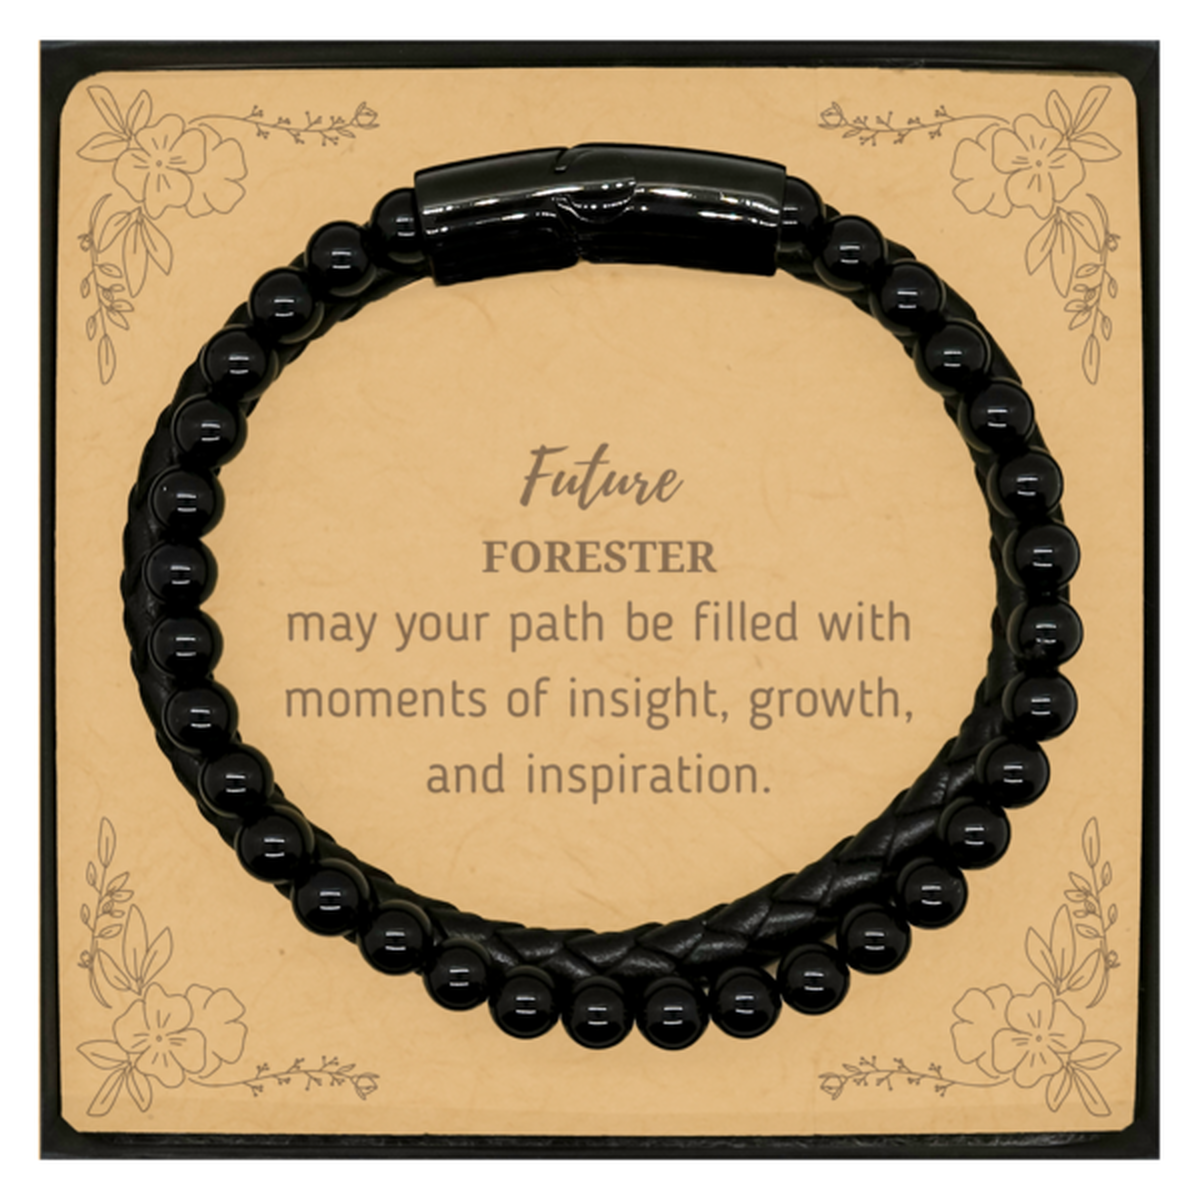 Future Forester Gifts, May your path be filled with moments of insight, Graduation Gifts for New Forester, Christmas Unique Stone Leather Bracelets For Men, Women, Friends